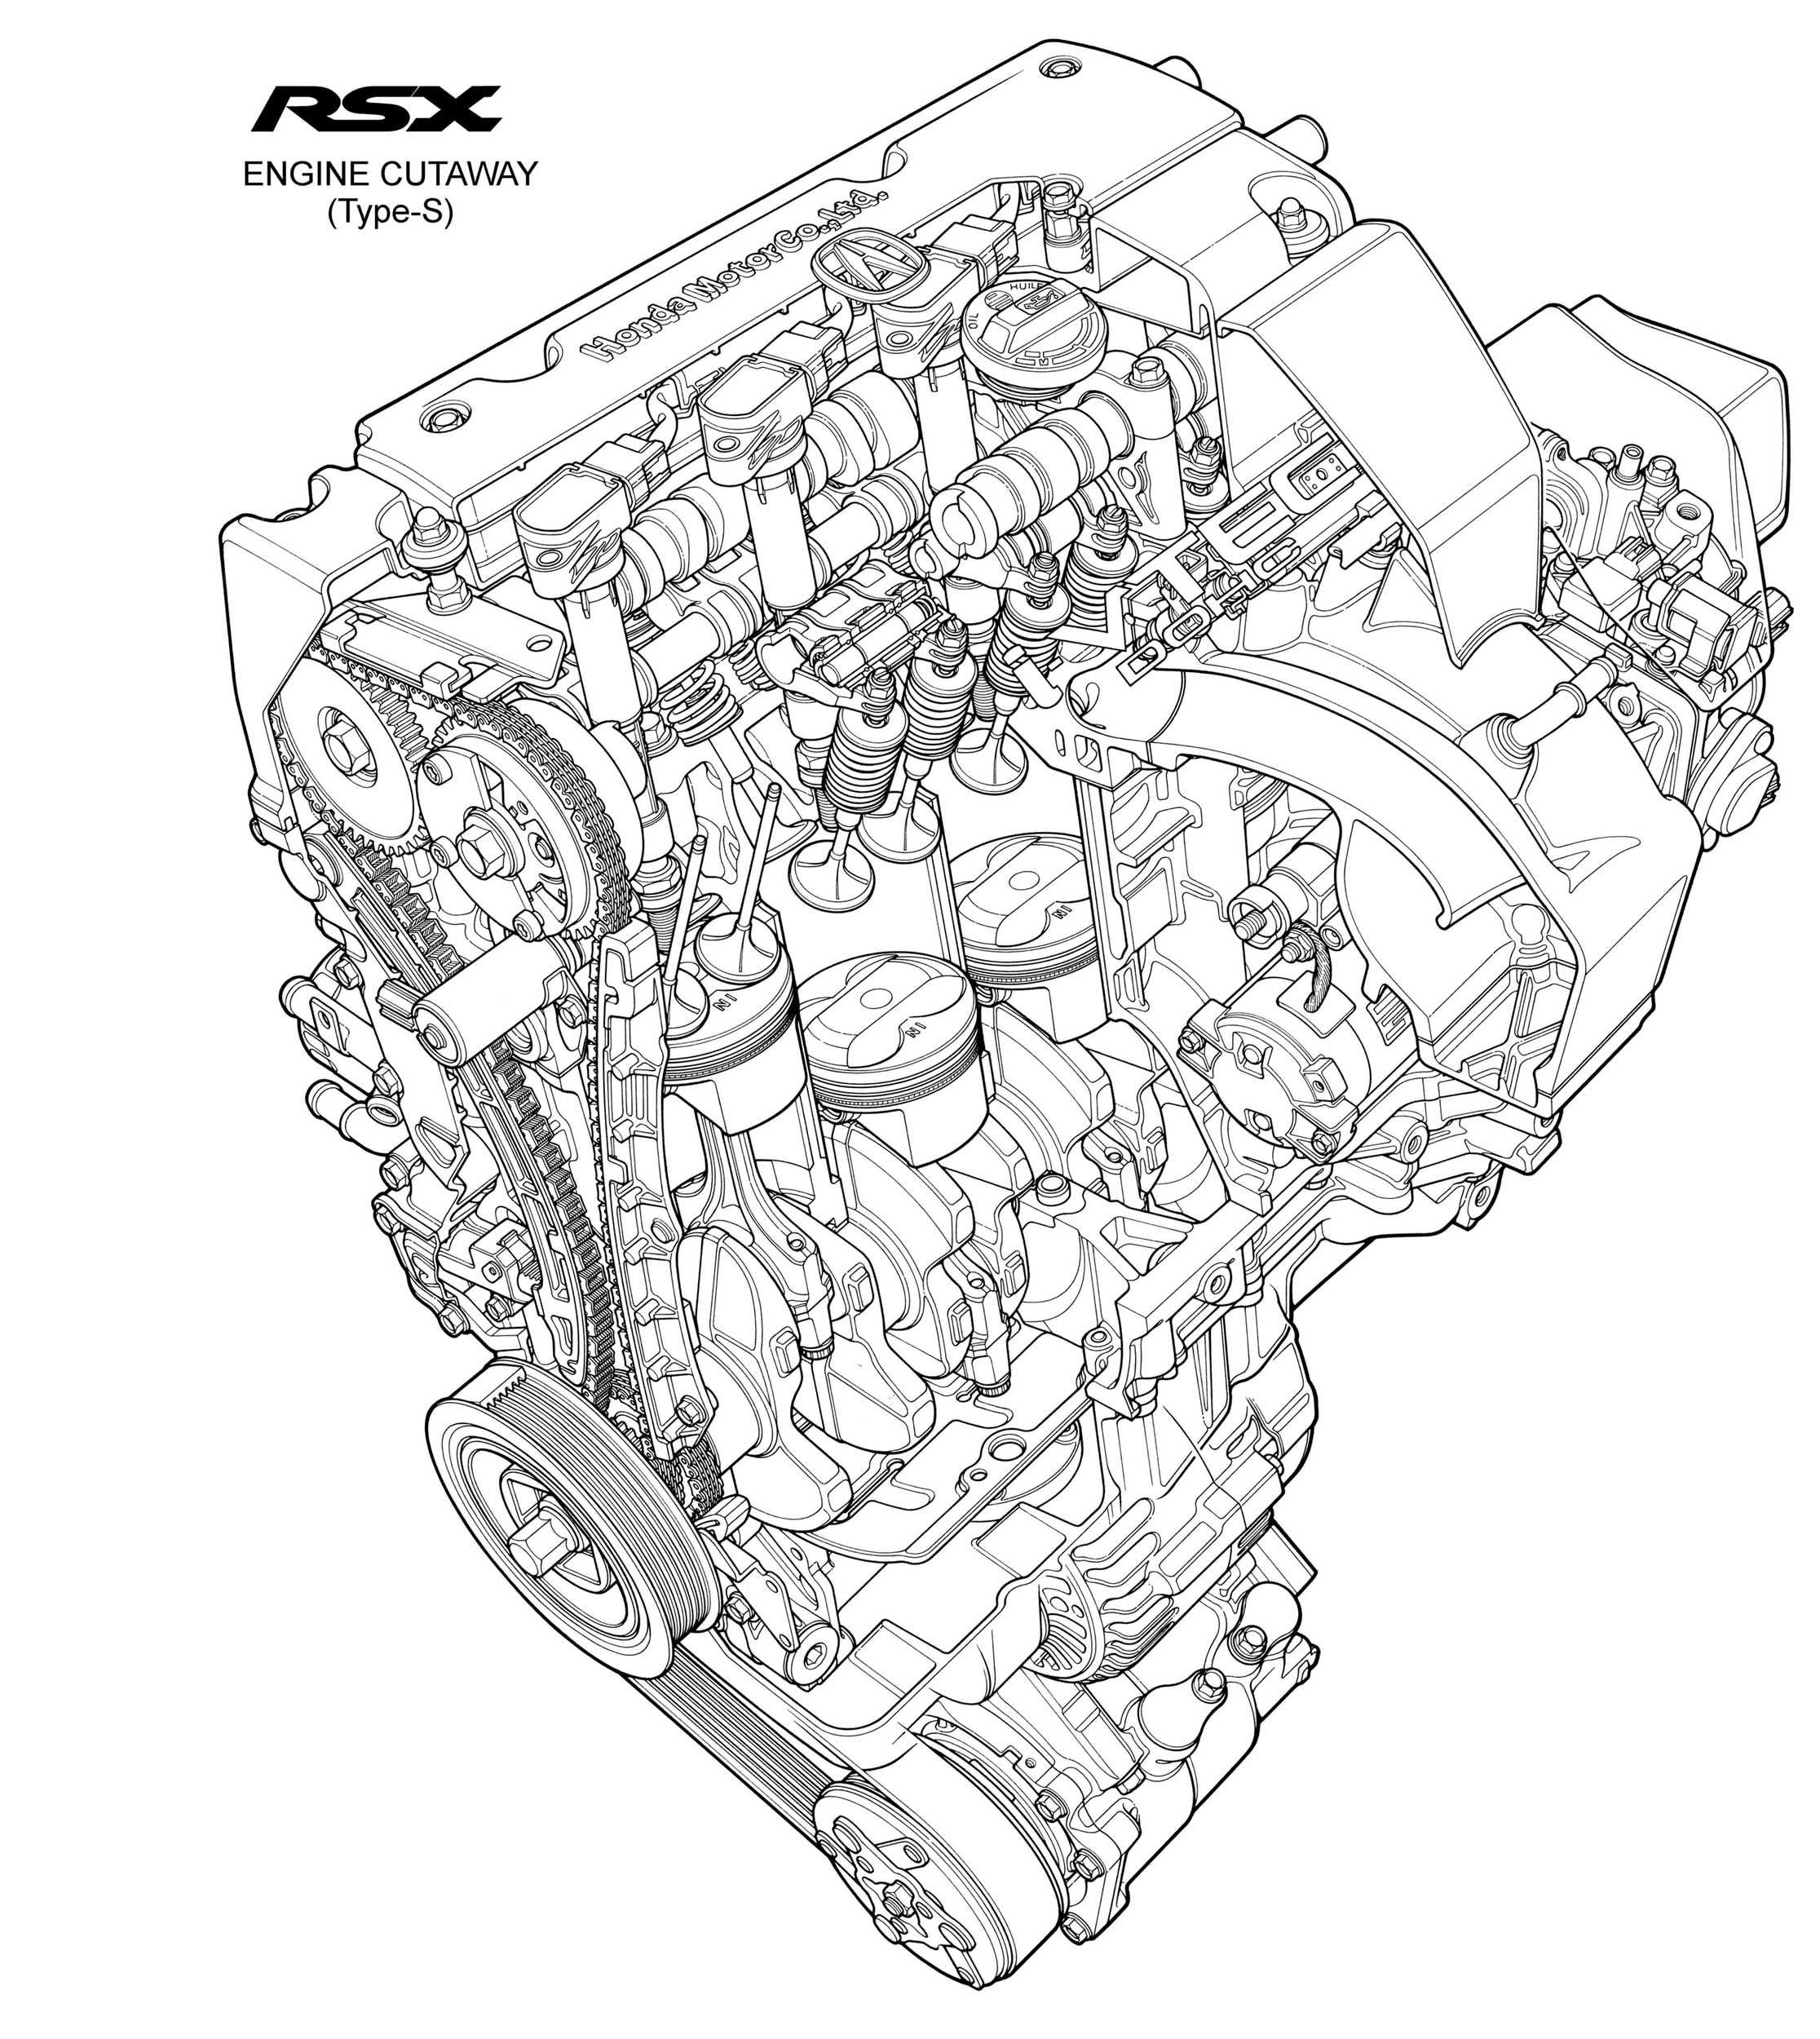 Acura RSX Type S engine cutaway. Acura. Acura rsx type s